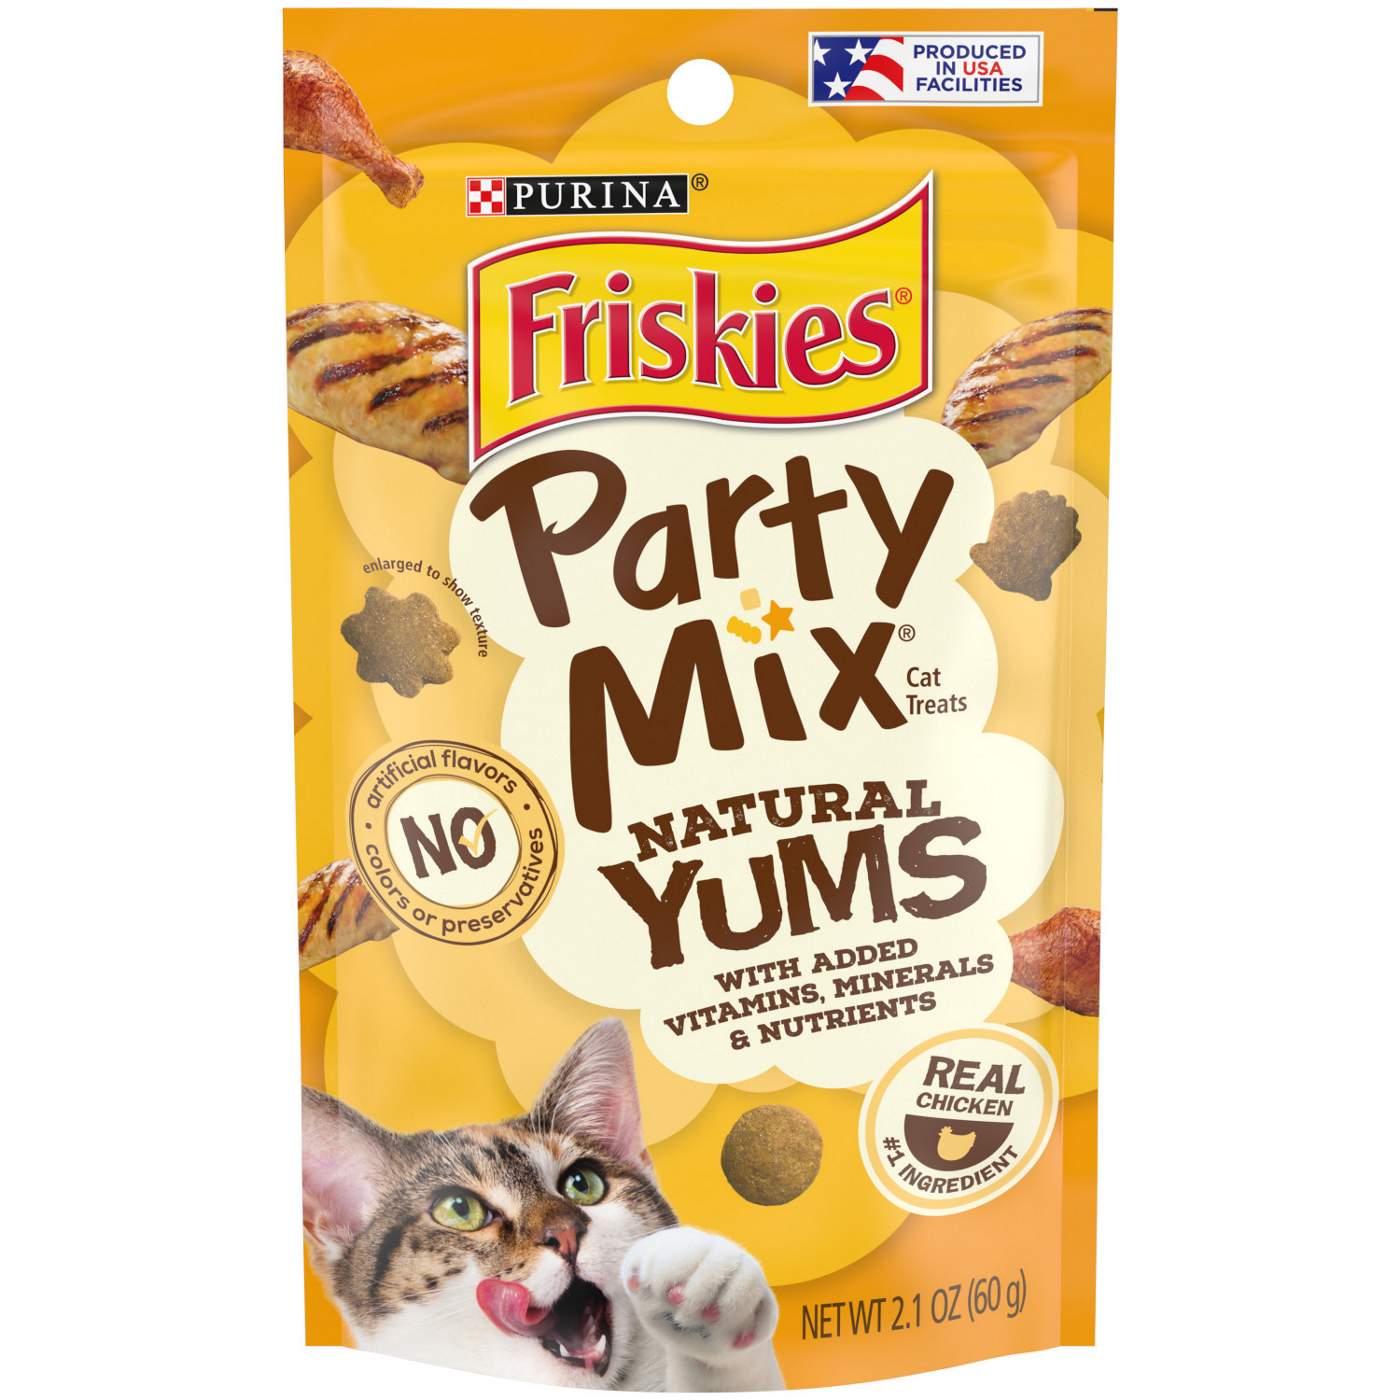 Friskies Purina Friskies Natural Cat Treats, Party Mix Natural Yums With Real Chicken & Vitamins, Minerals & Nutrients; image 1 of 6